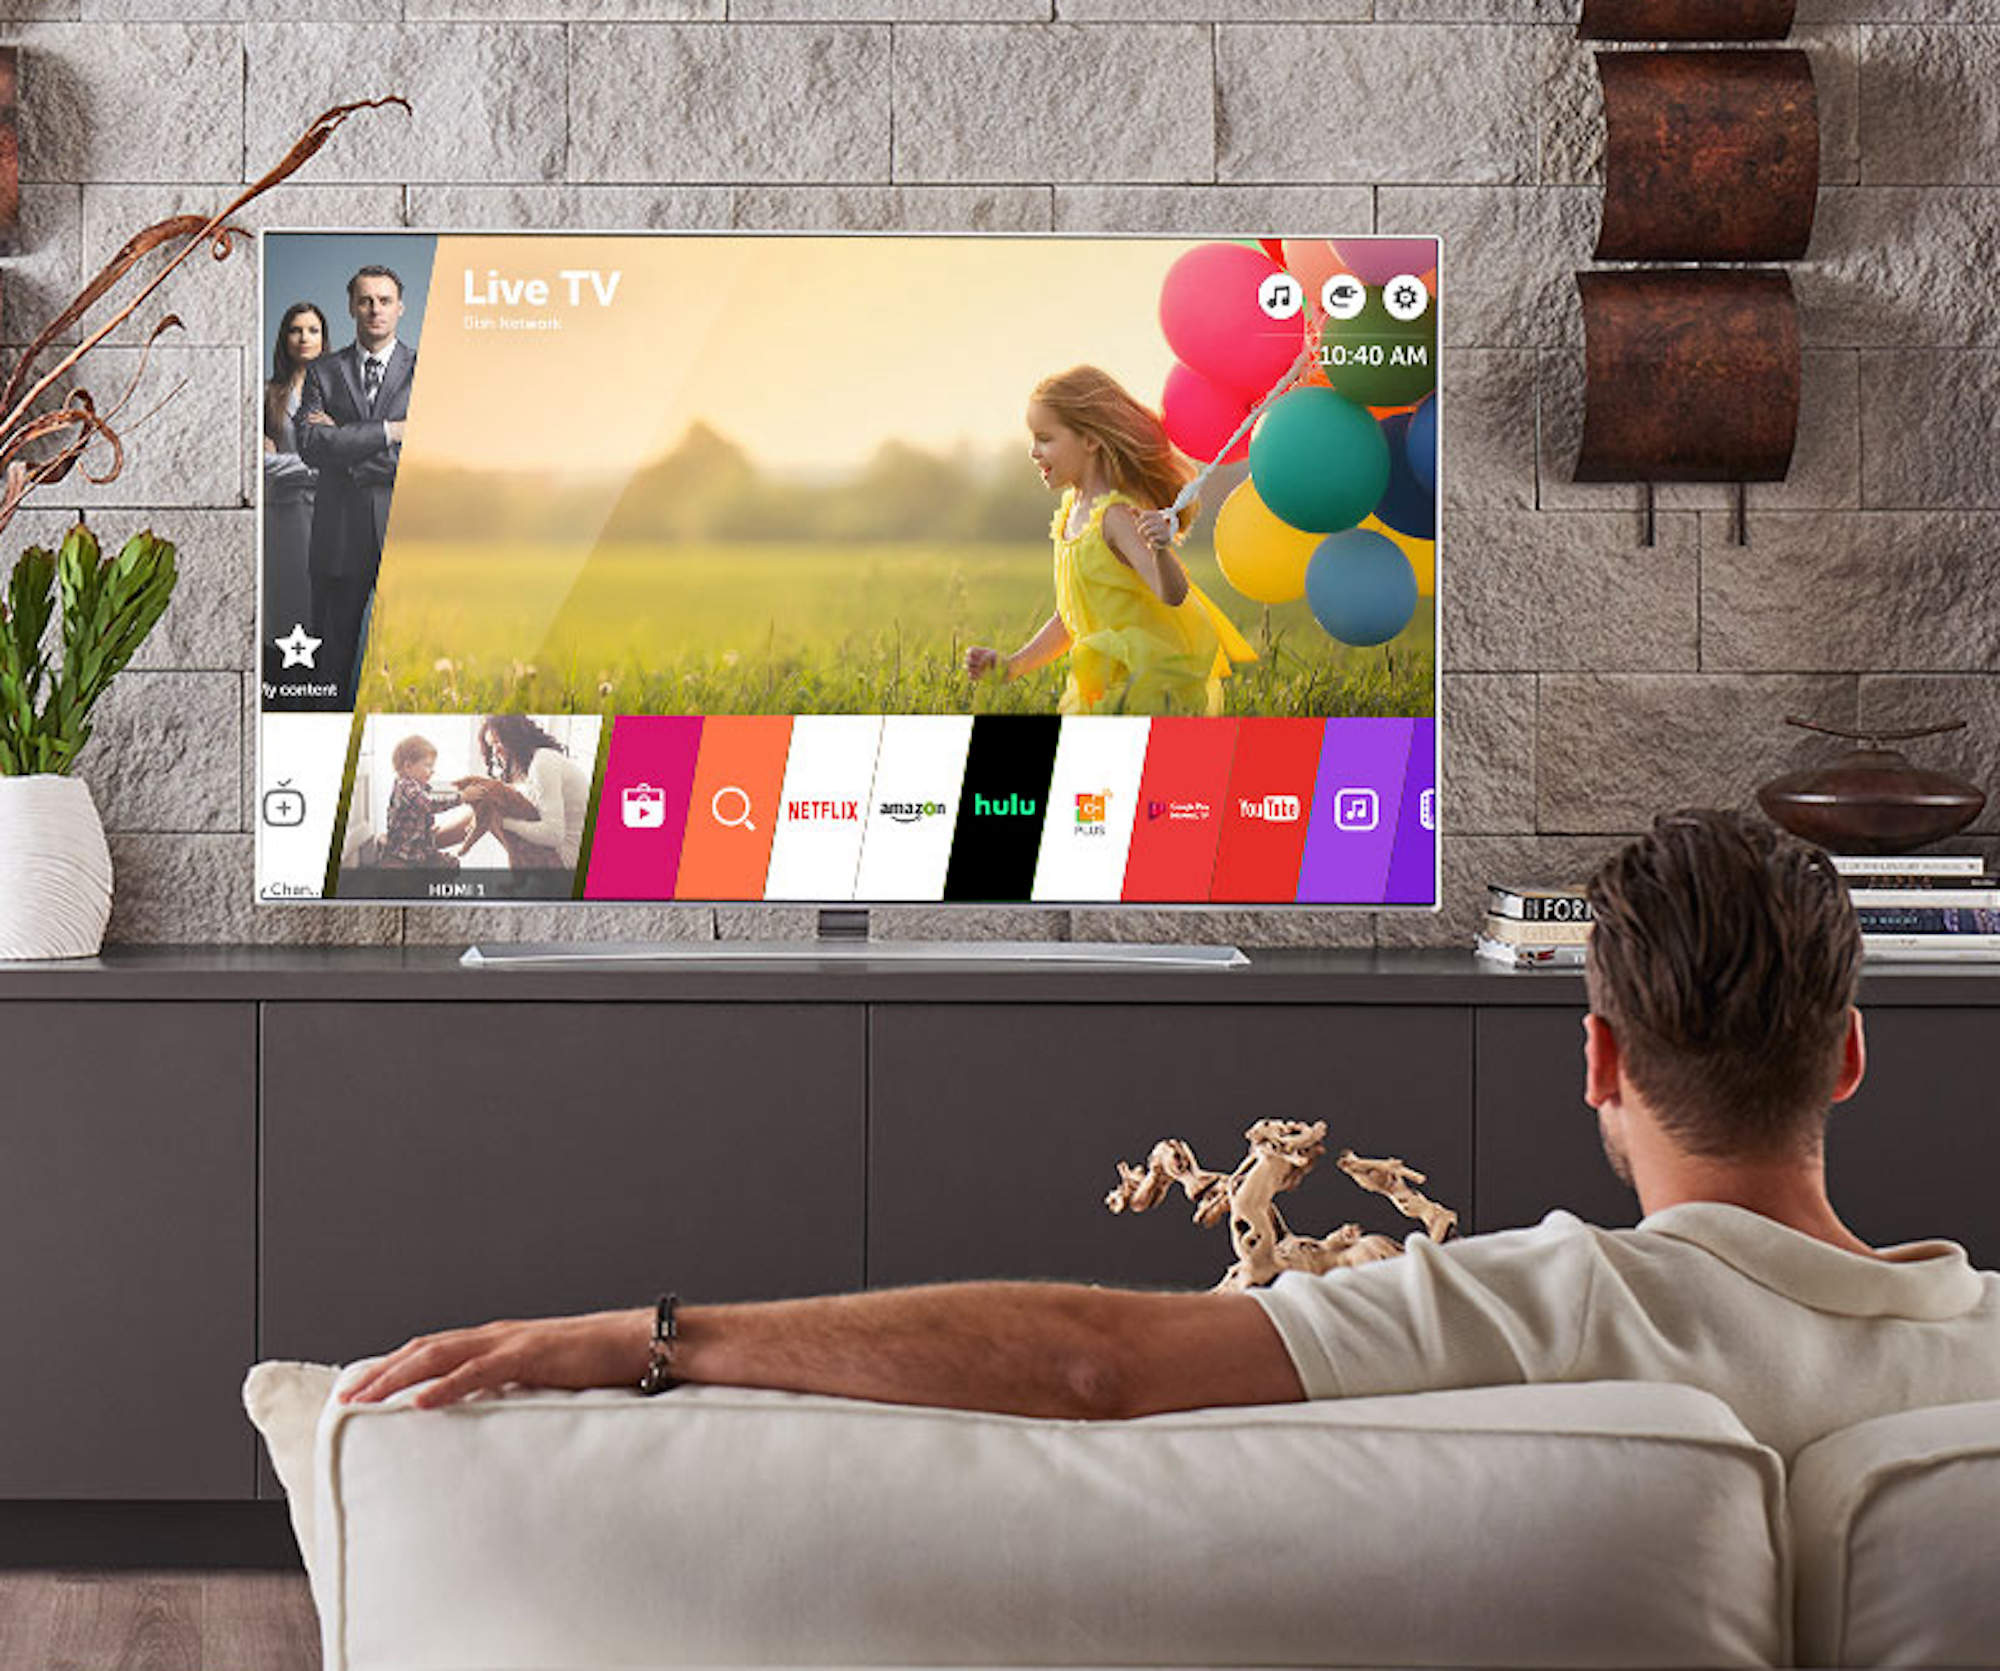 Learn about Smart TV operating systems